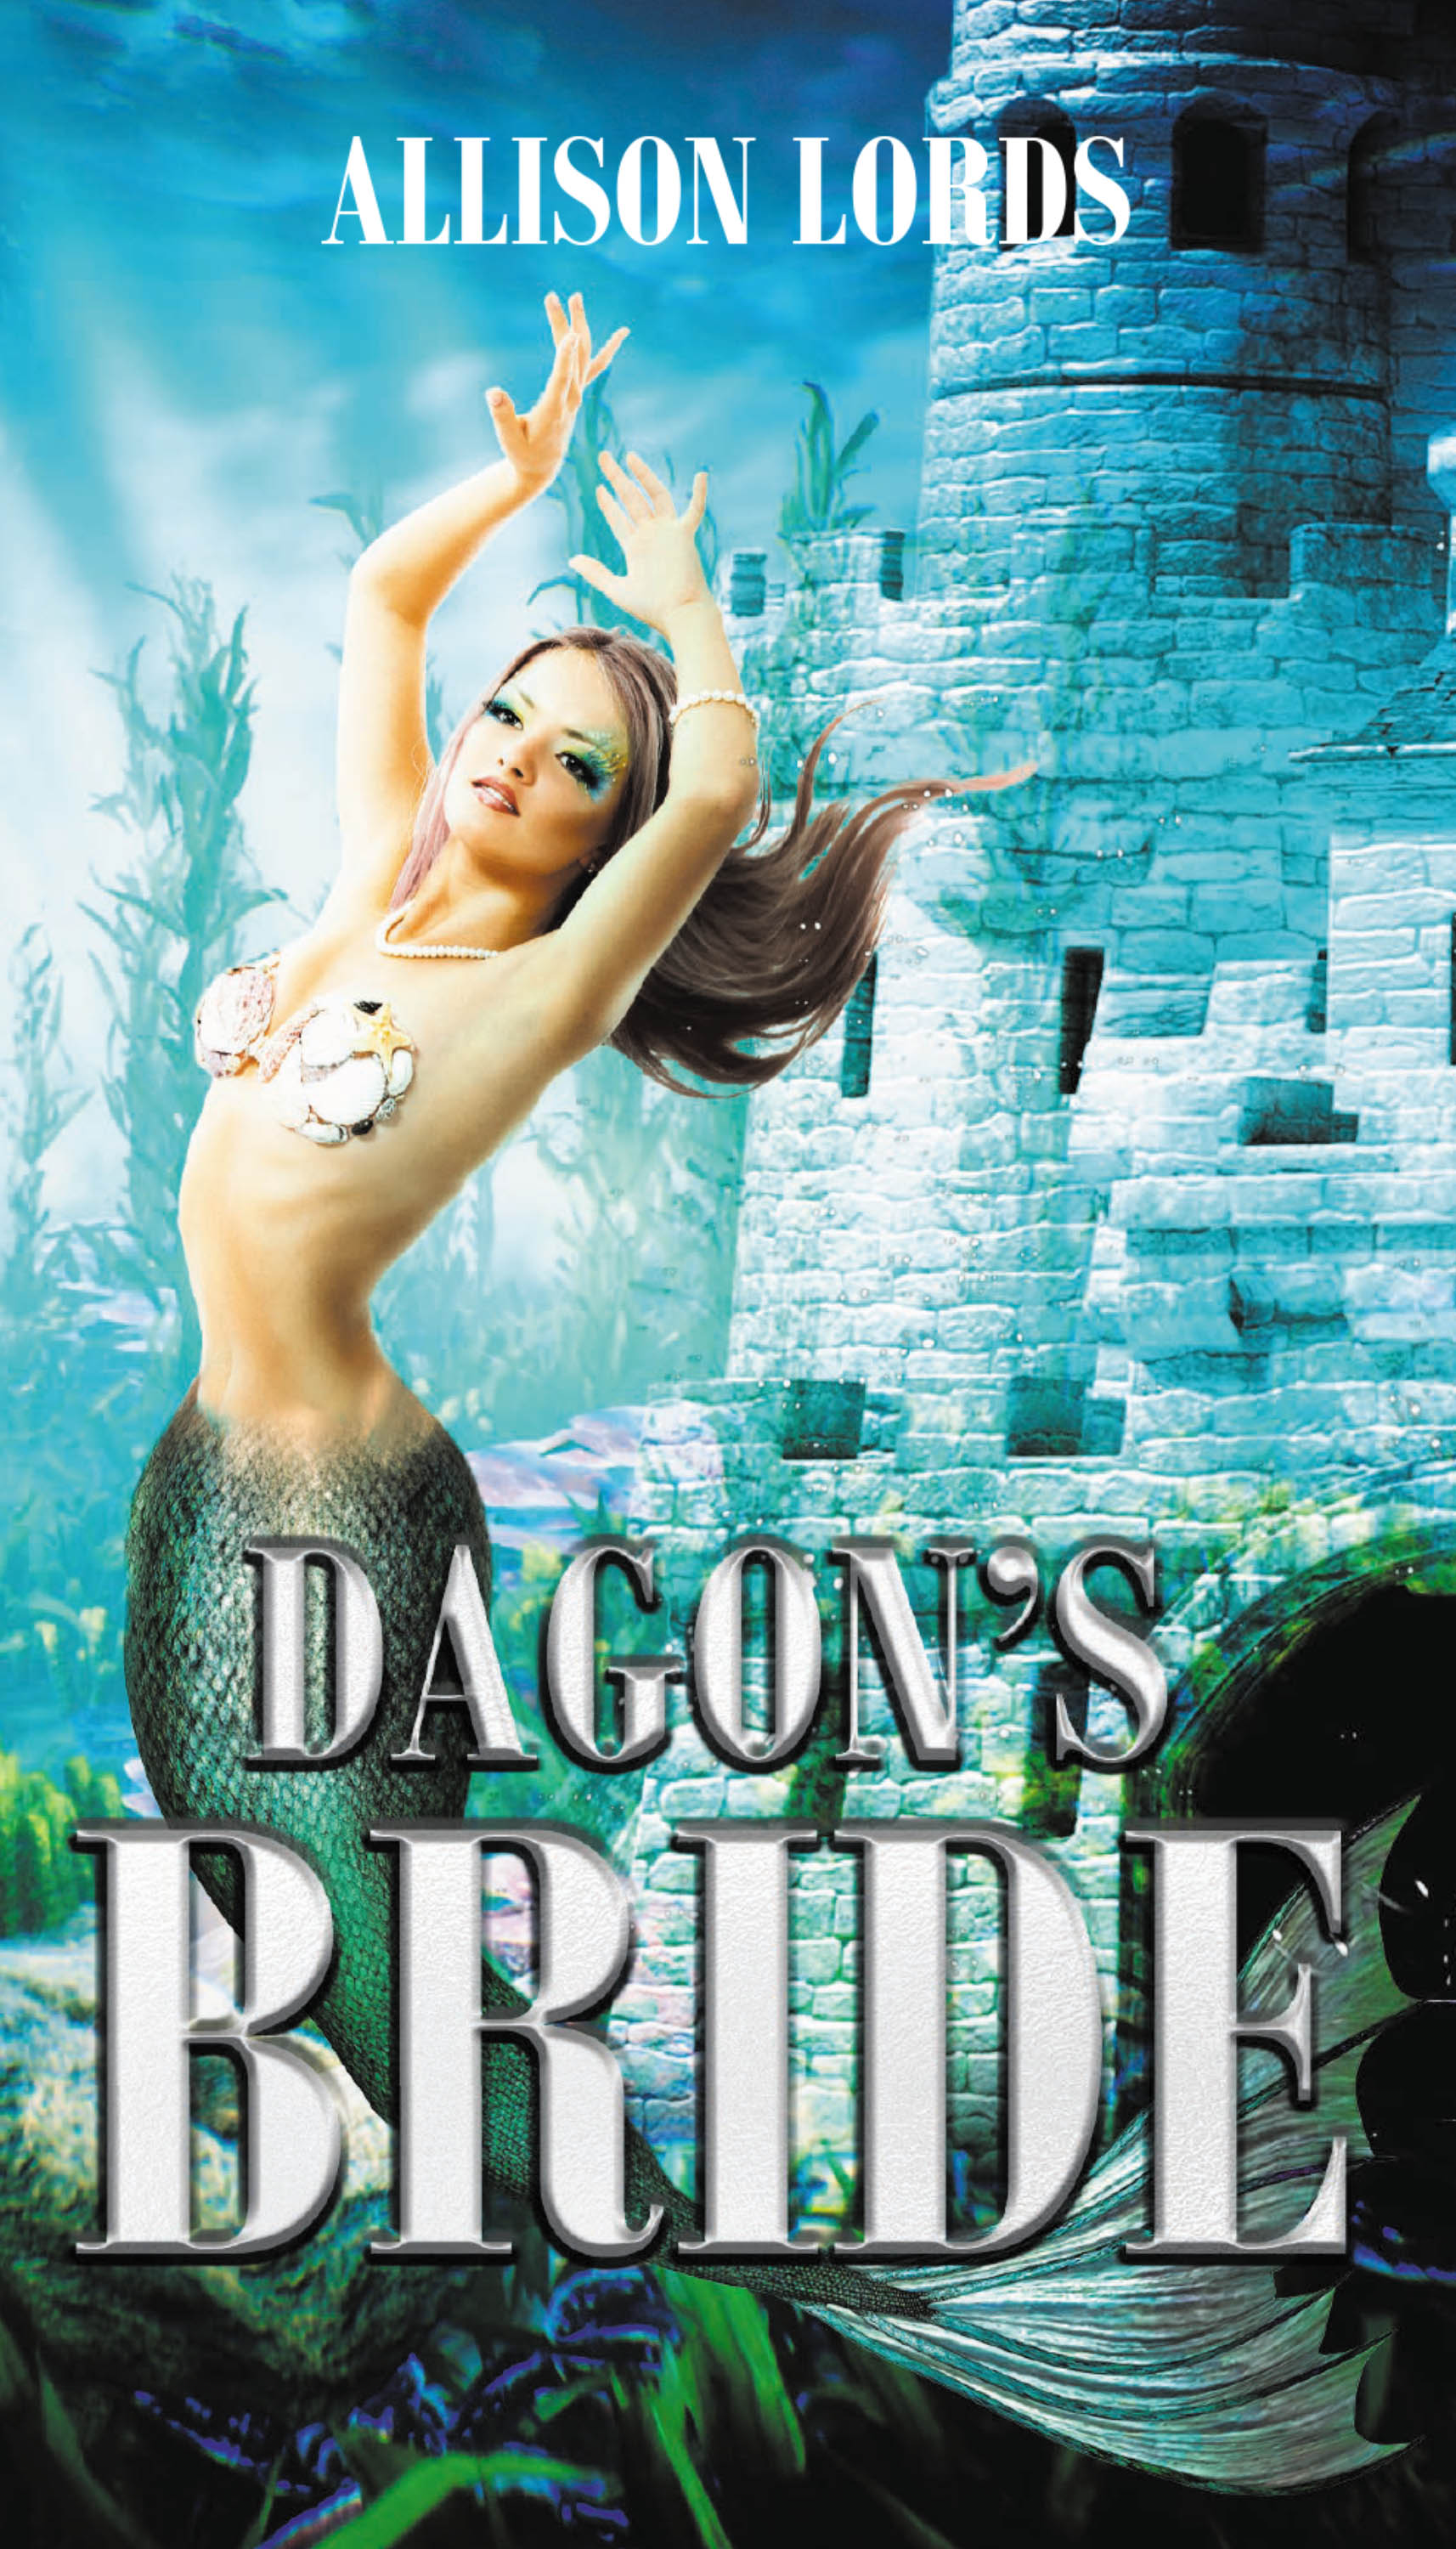 Author Allison Lords’s New Book, "Dagon’s Bride," is a Captivating Fantasy Novel That Plunges Readers Into the Depths of the Sea About Dagon’s Quest to Find a Mate